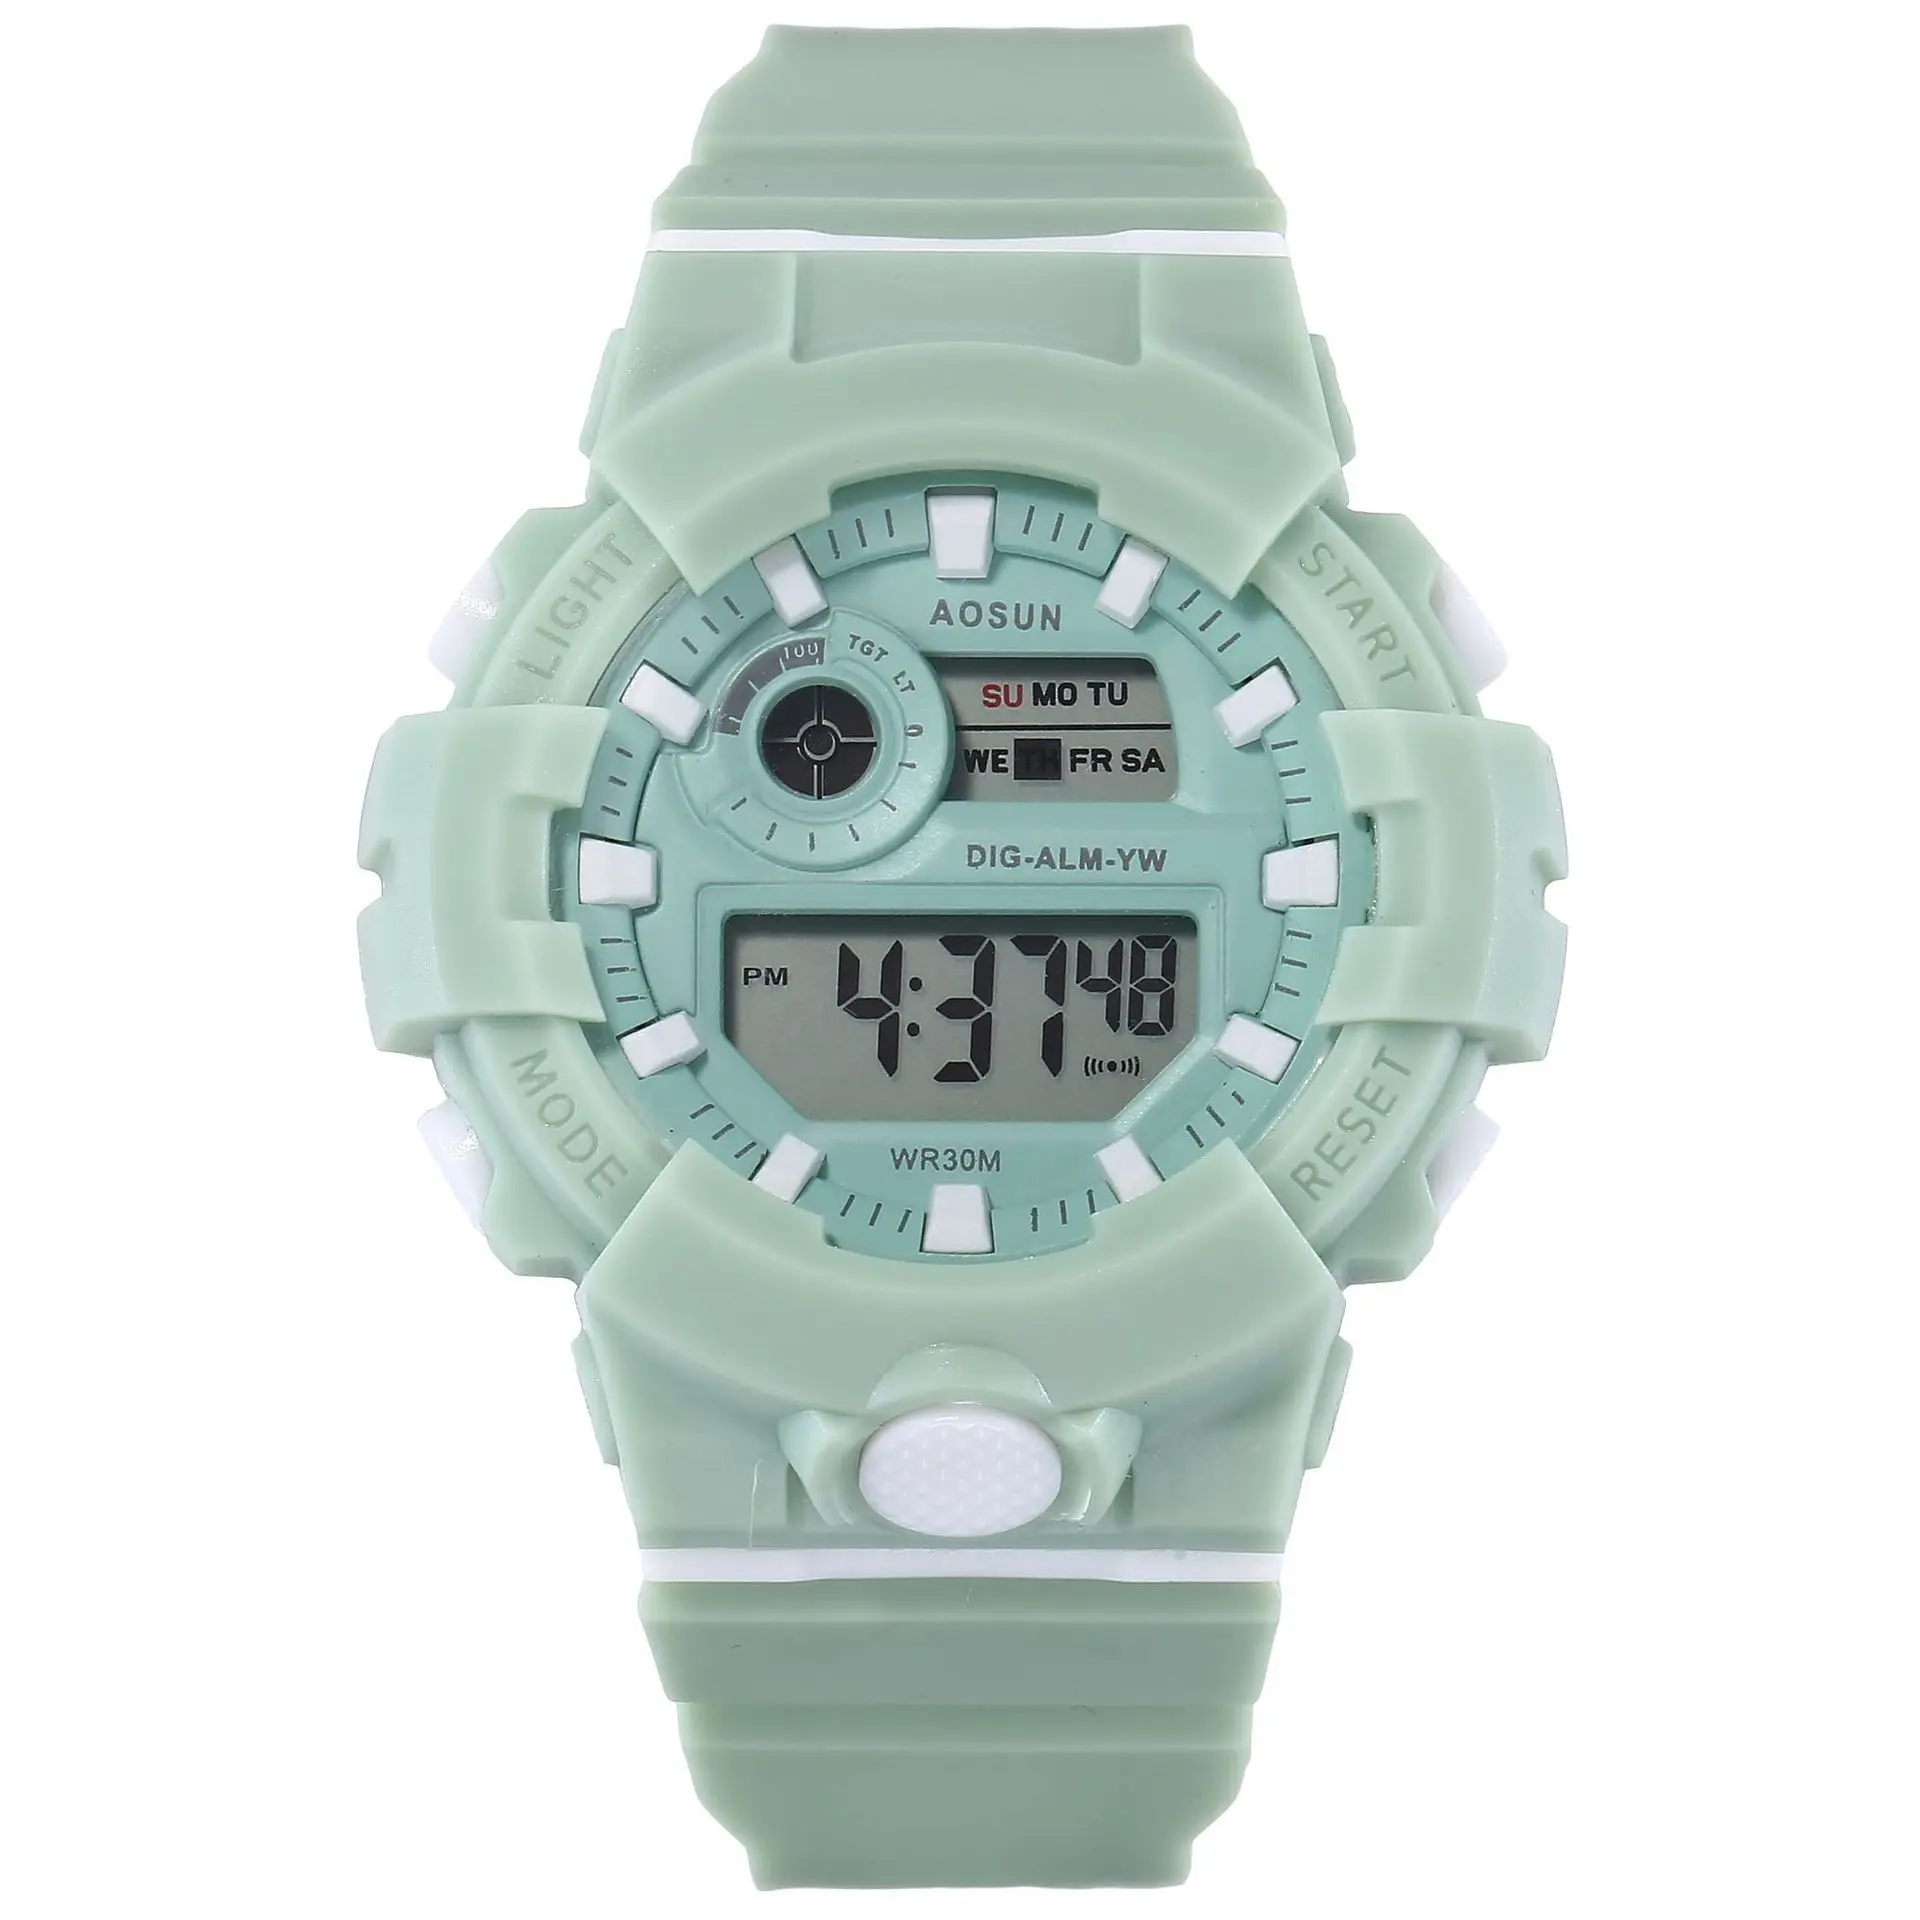 Electronic watch waterproof electronic watch for boys and girls multifunctional watch for girls enlarge